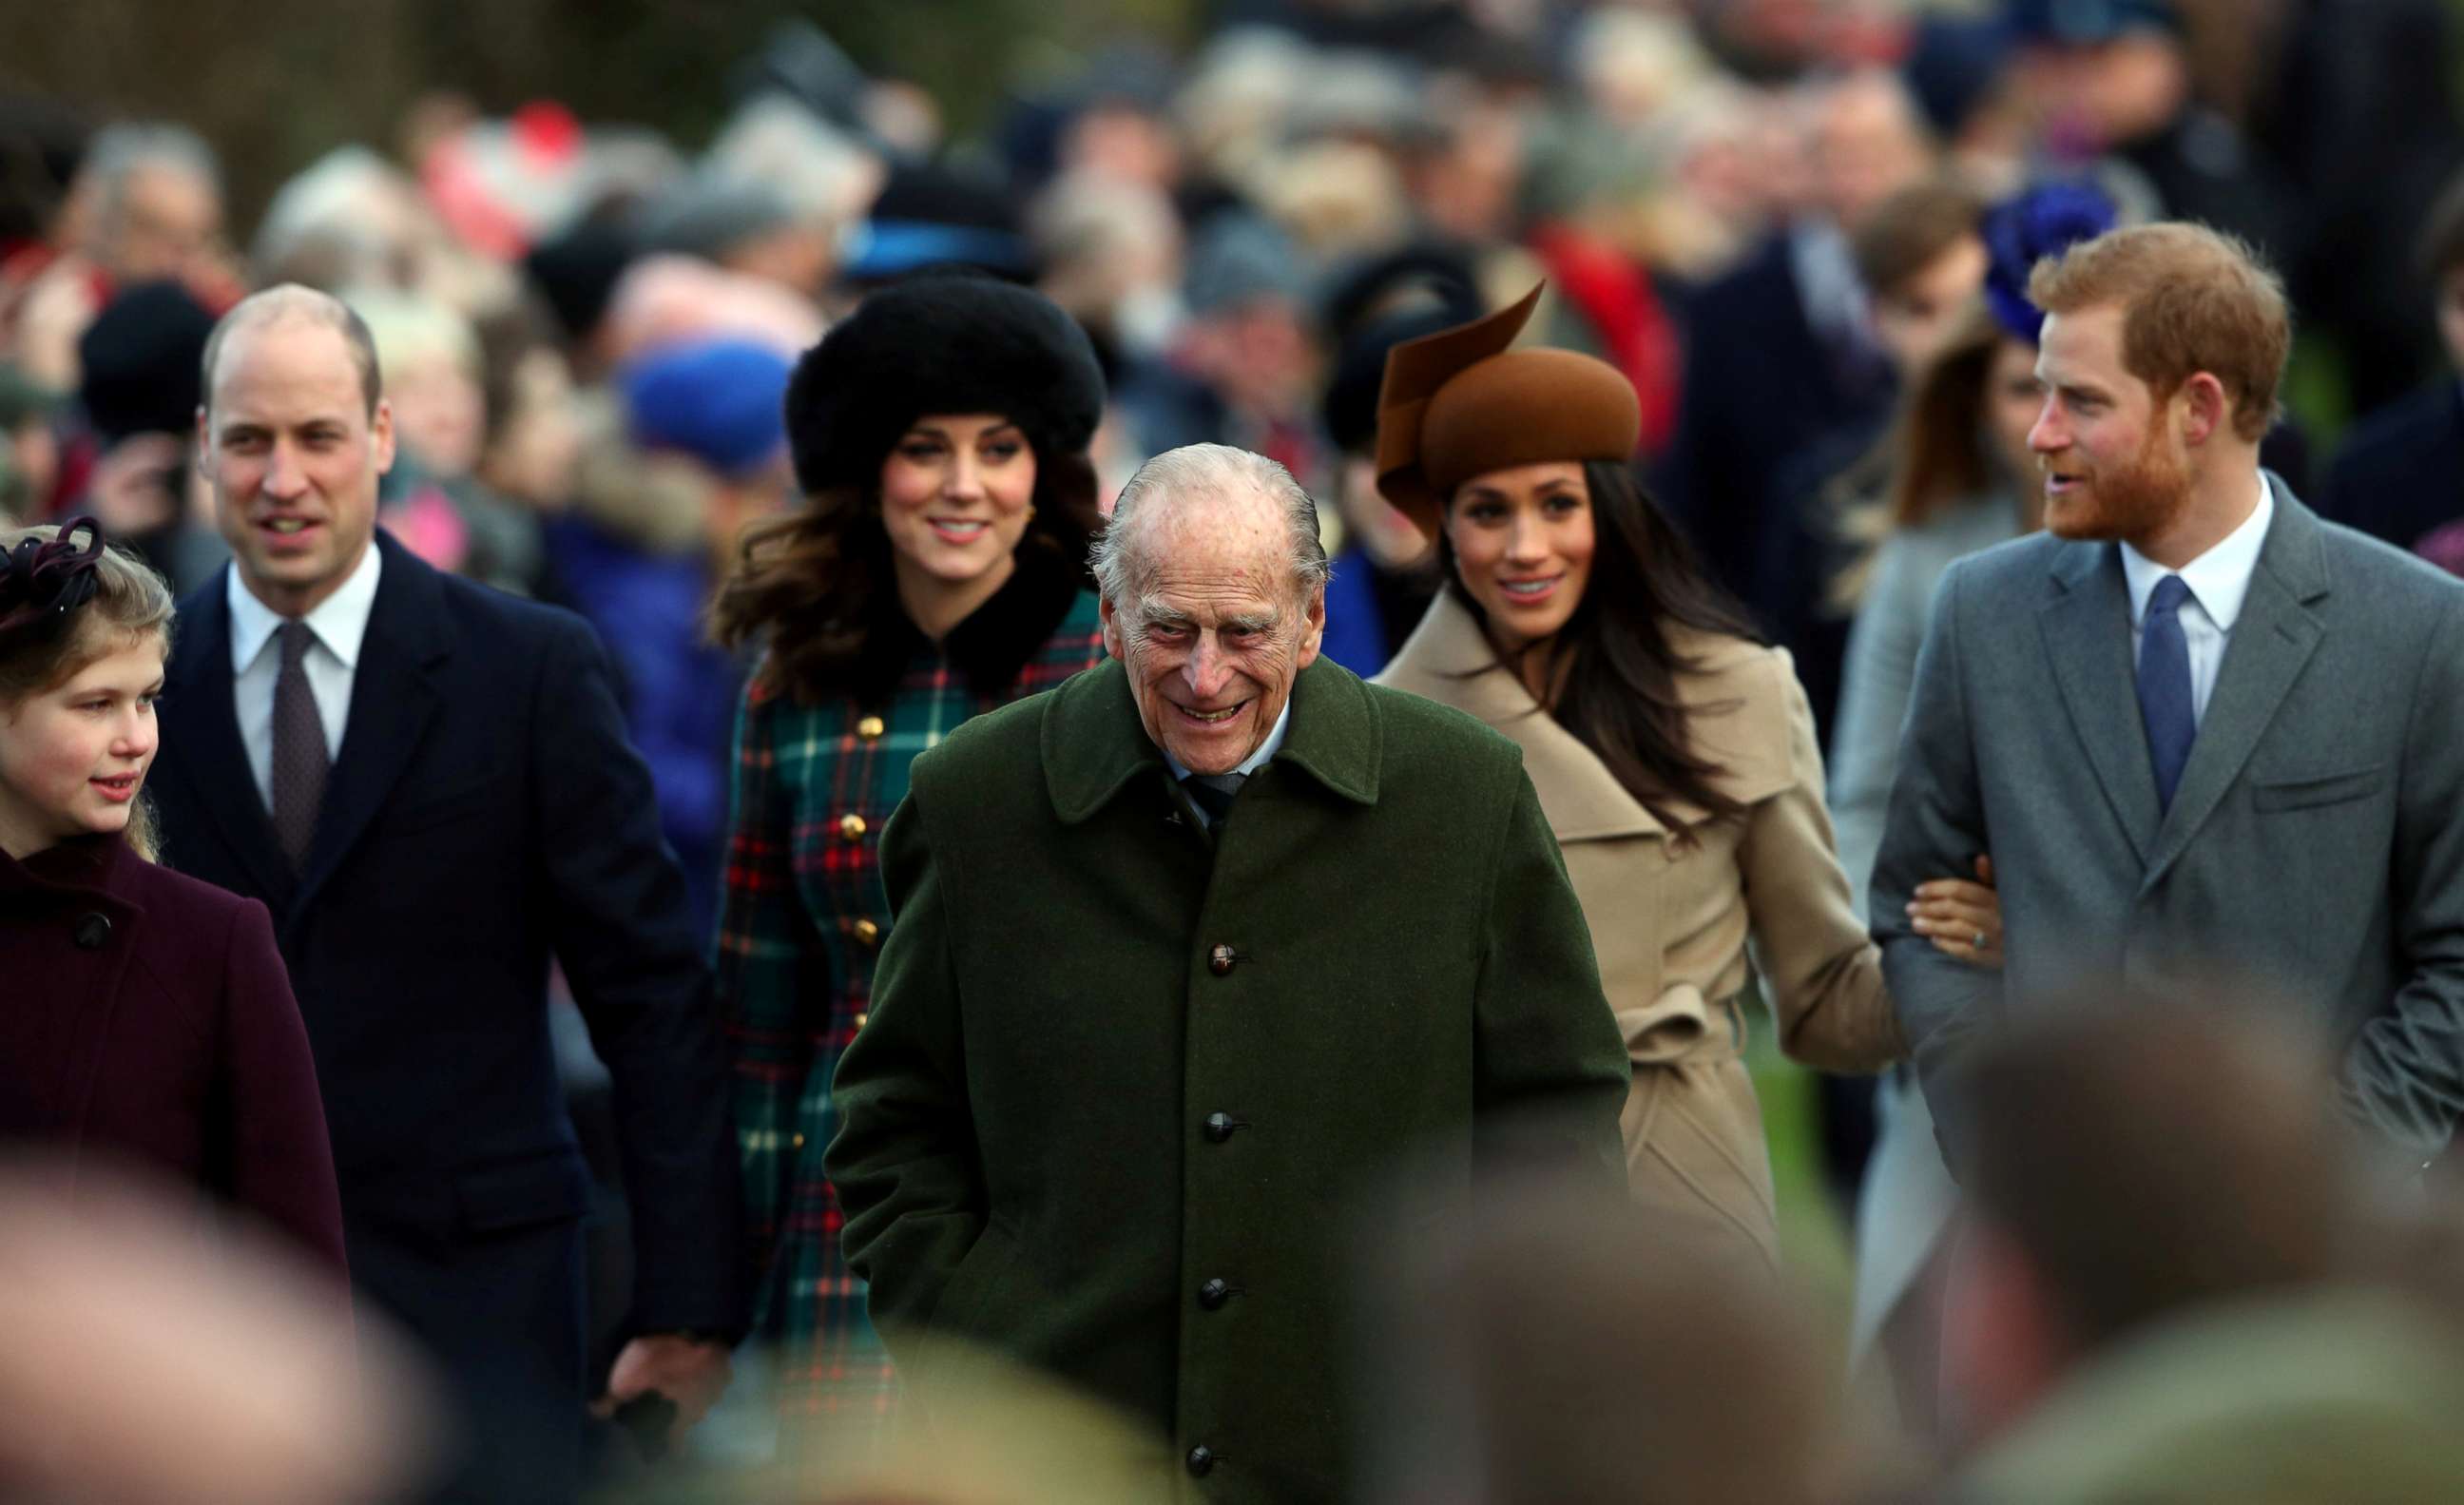 PHOTO: Britain's Prince Philip, the Duke of Edinburgh, leads members of the royal family as they arrive to attend the Christmas Day church service on the Sandringham estate in eastern England, Dec. 25, 2017.